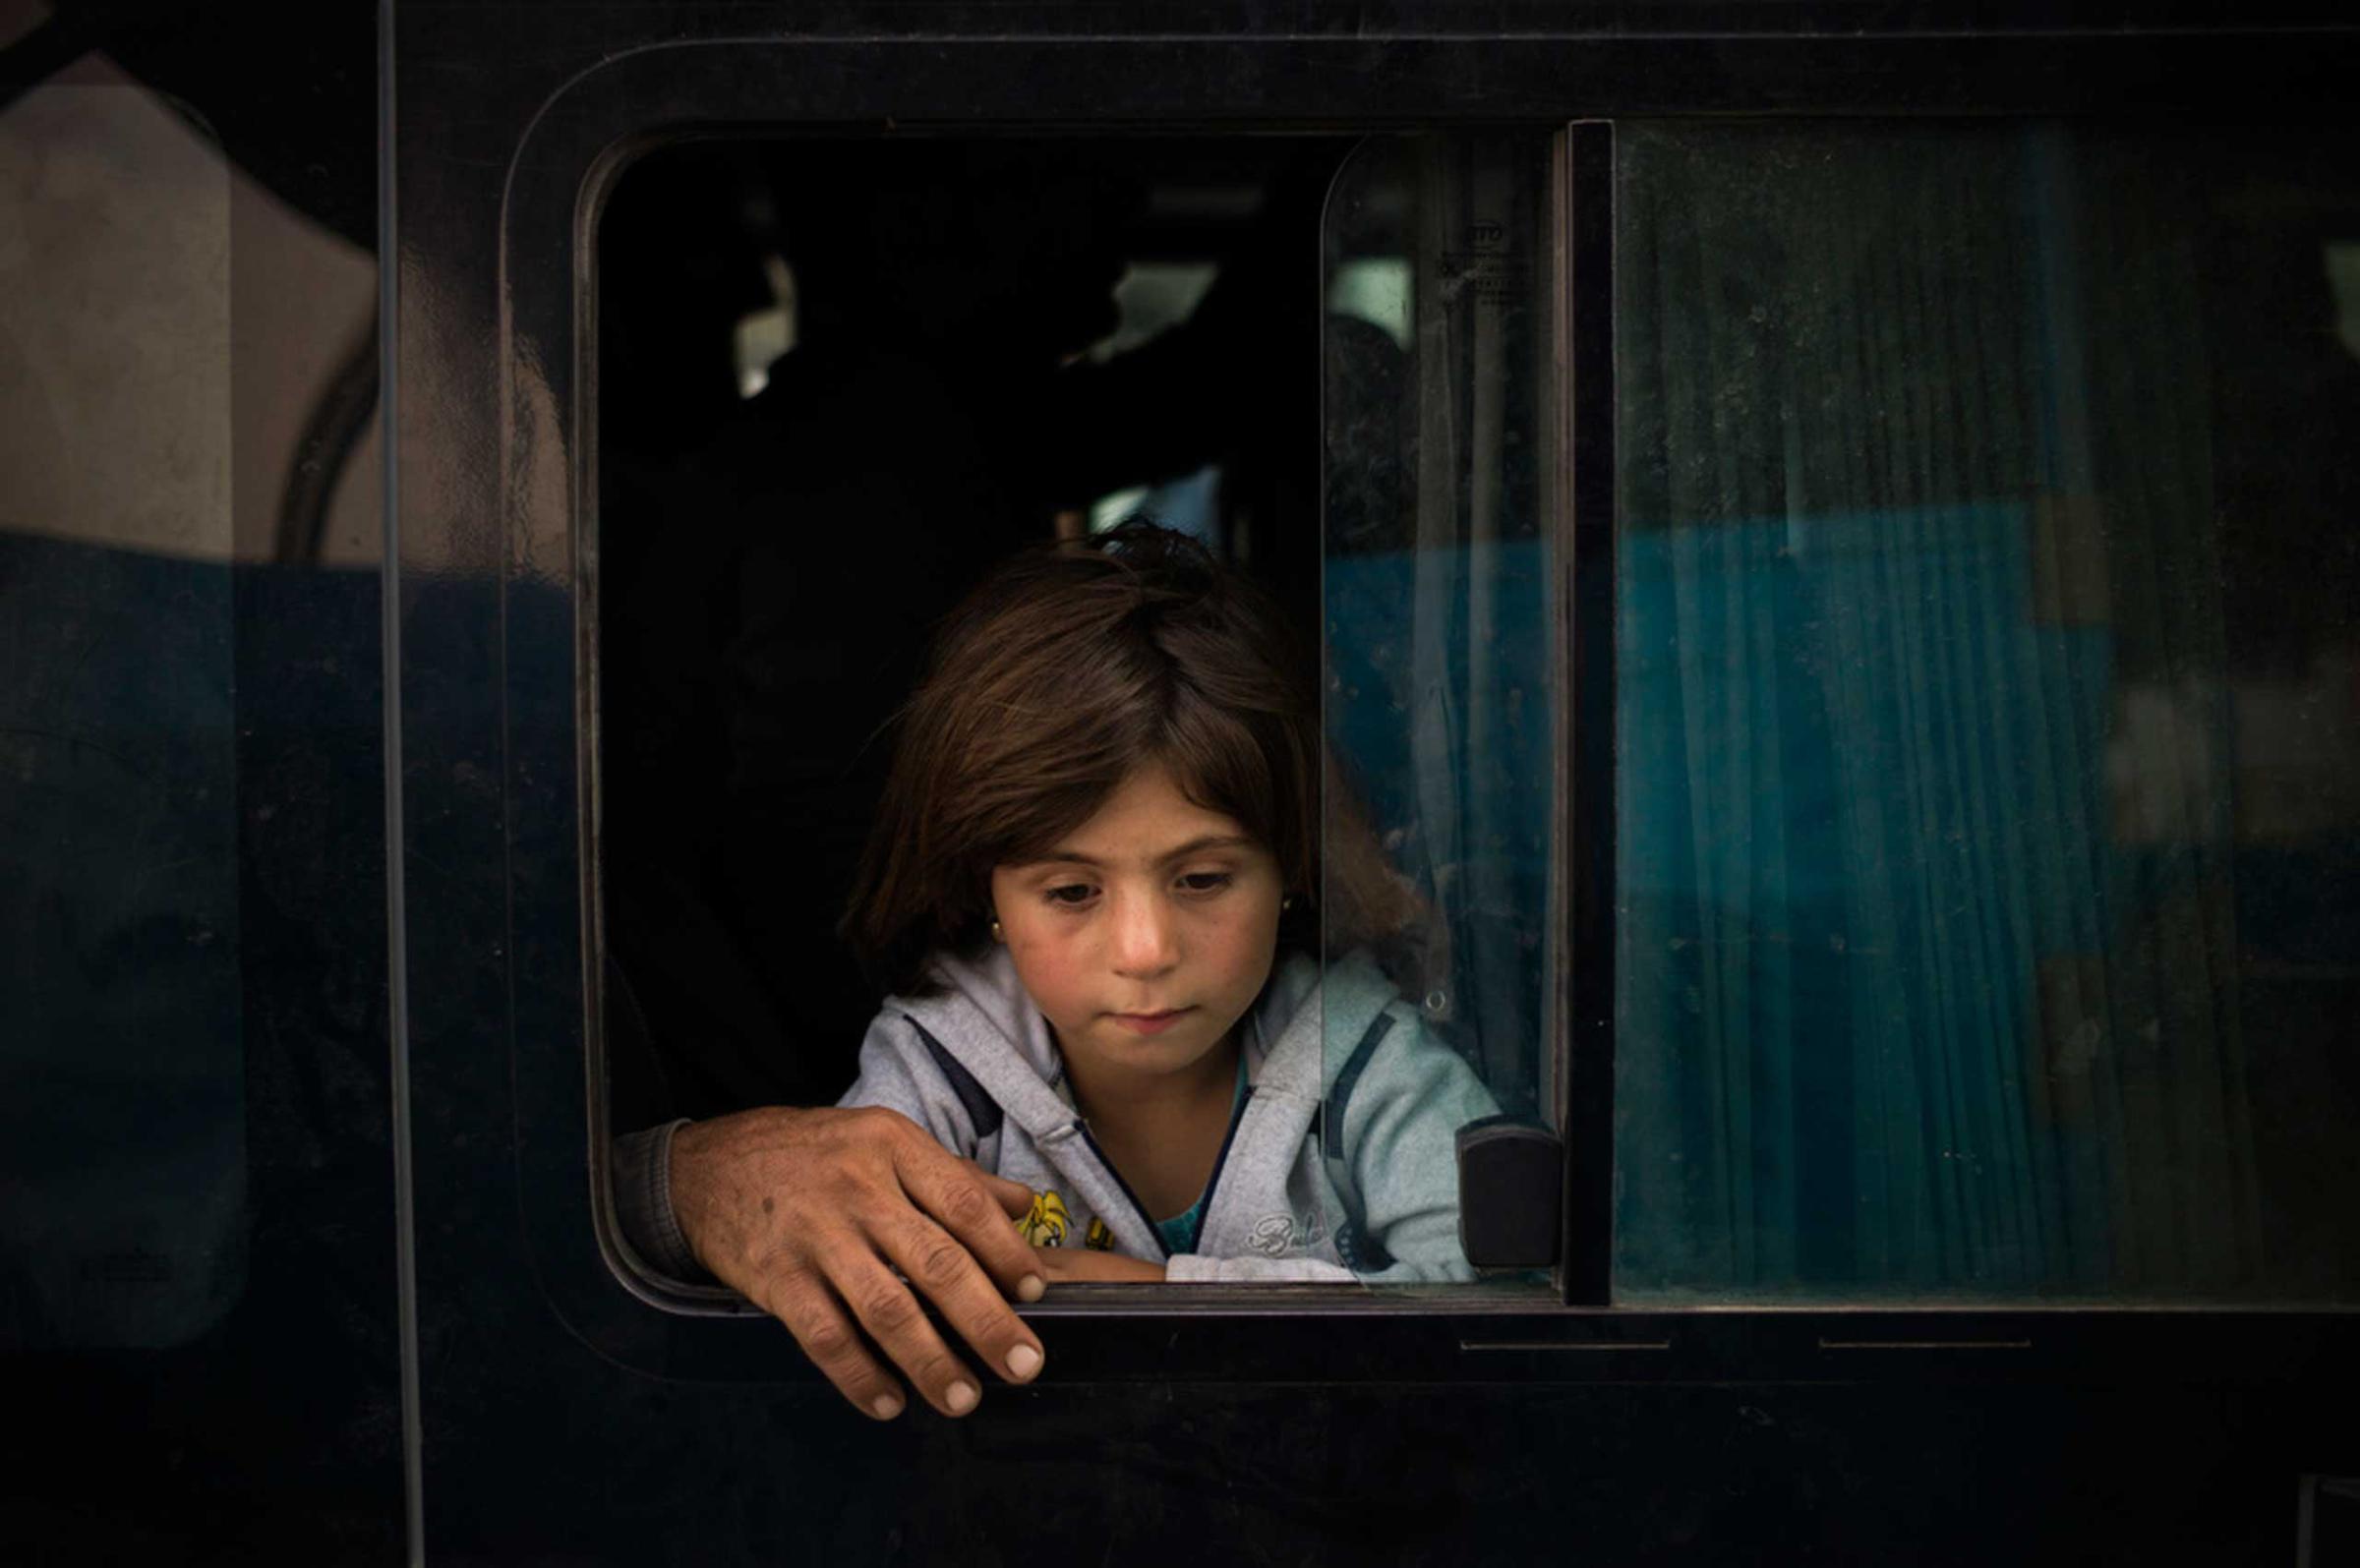 Iraq / Syrian Refugees / A young Syrian girl from Kobani and her fathers hand can be seen inside a bus arriving at a new transit point at the Ibrahim Khalil Border Crossing in Iraq after traveling by bus today from Turkey. Soon after arriving, they get moved to new buses which bring them to Gawilan Camp between Dohuk and Erbil. Most hope to leave the camp and look for work in major cities, many however will have to stay in camps around the Kurdish region. More then 2,000 Syrian refugee’s from Kobane have arrived since the Kurdish authorities in Iraq opened the border to Turkey on 10th October 2014 and the Kurdish authorities expect the numbers to rise to several tens of thousands in the coming days and weeks. / D. NAHR / October 2014